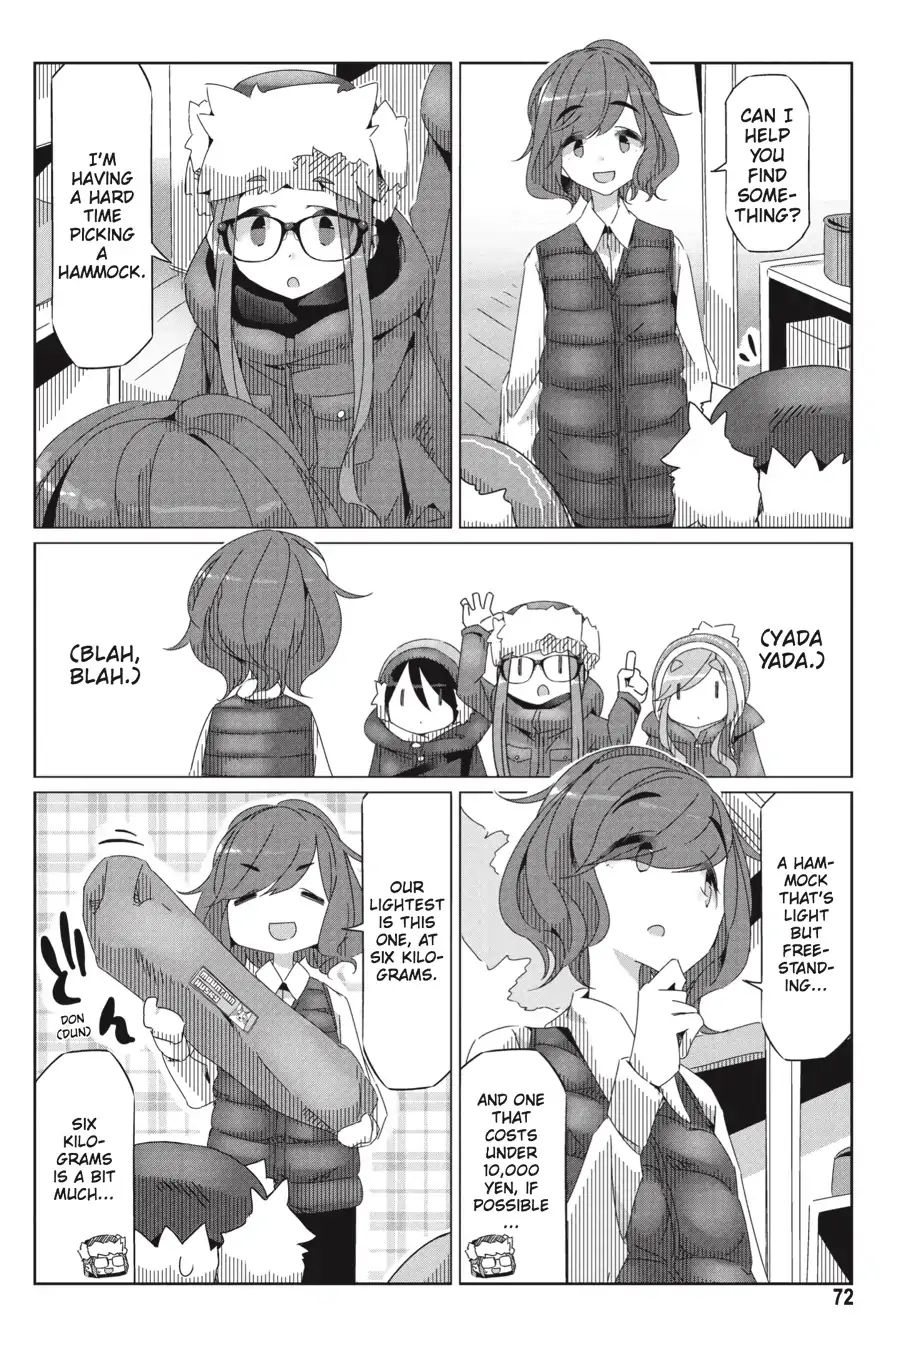 Yurucamp Vol.6 Chapter 31: Caribou-kun and the Camp Chairs